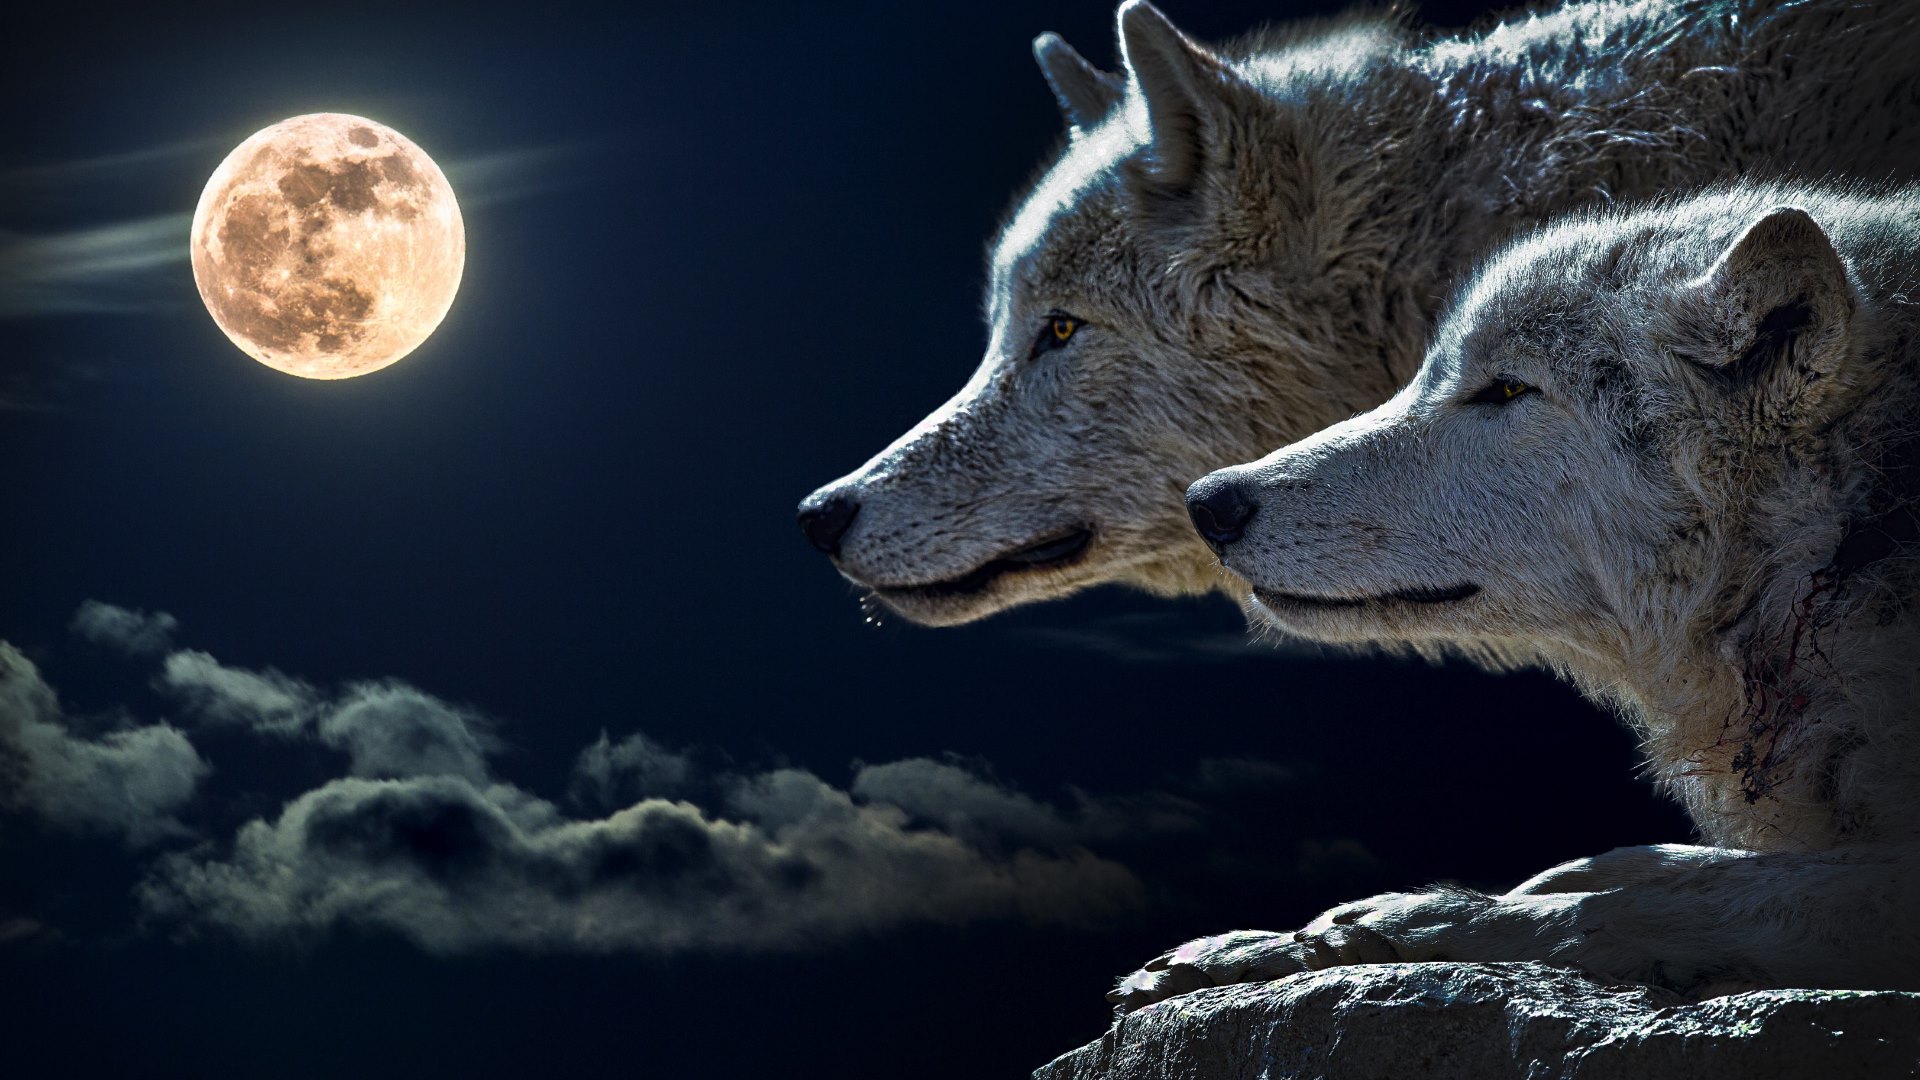 Wolves and Full Moon HD Wallpapers. 4K Wallpapers